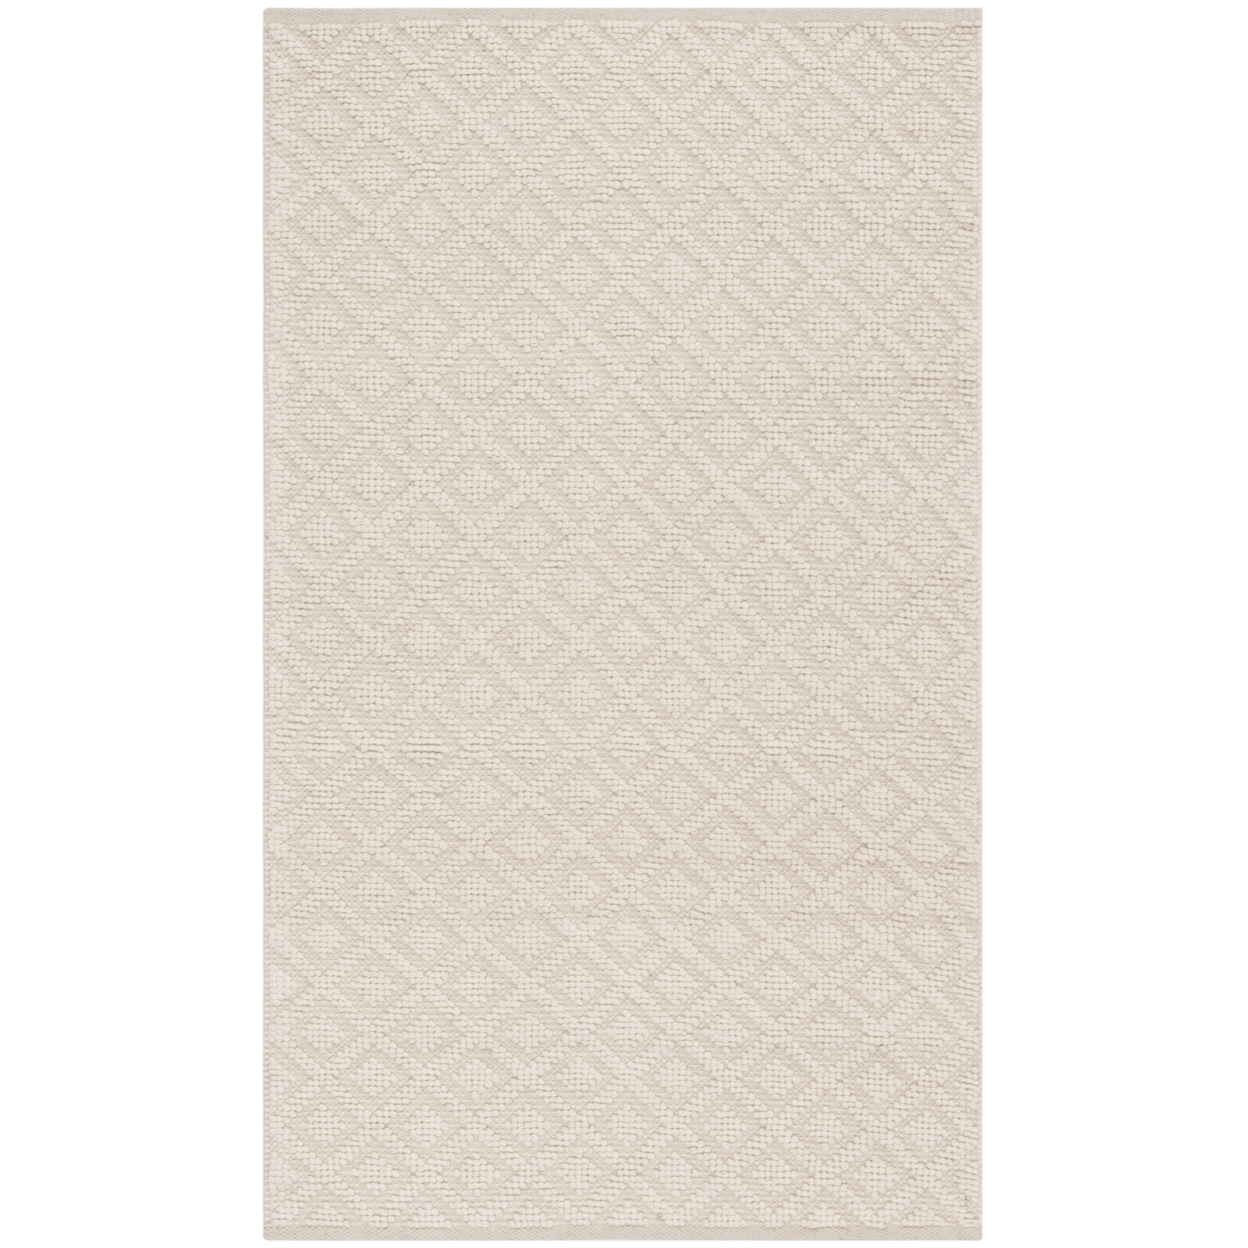 SAFAVIEH Vermont Collection VRM104A Handwoven Ivory Rug - 4 X 6